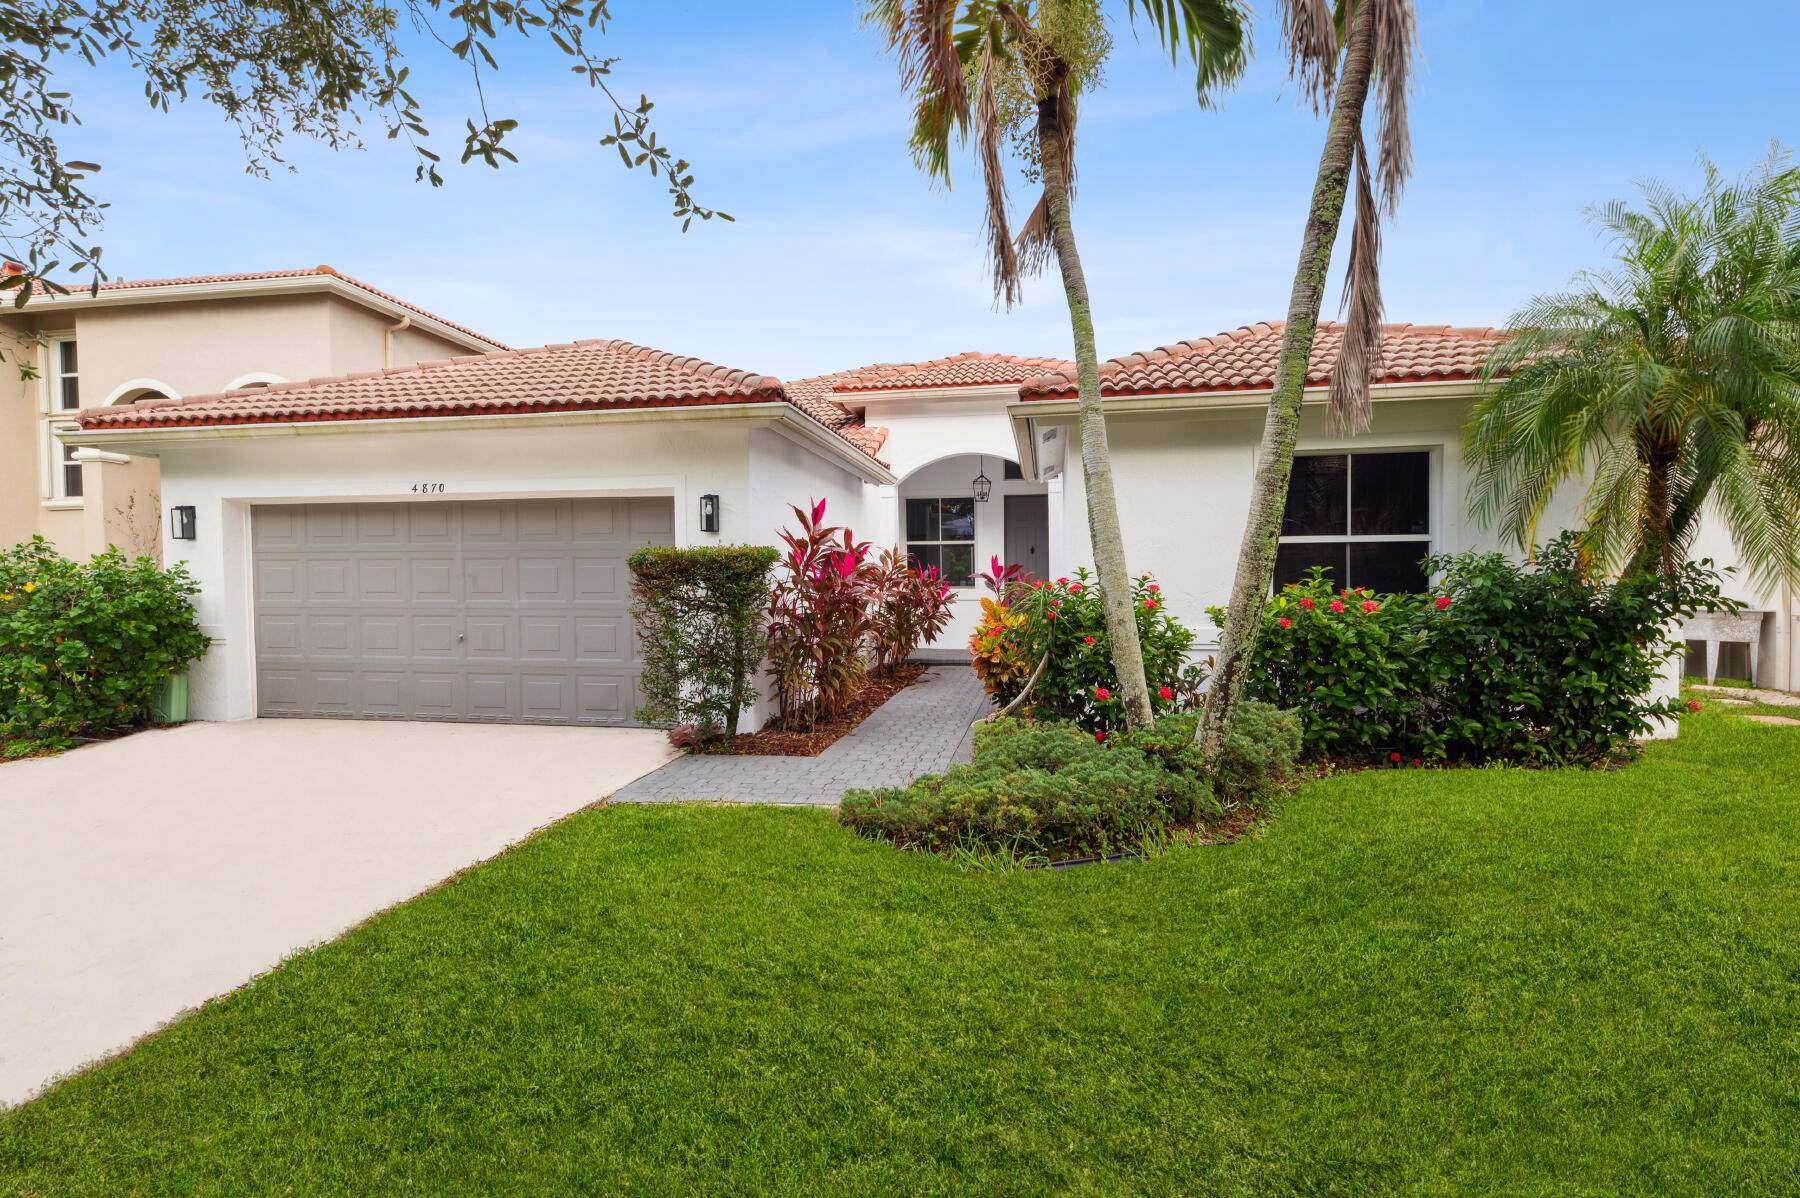 Welcome to this stunning newly renovated single family home in the highly sought after gated community of Indigo Lakes.